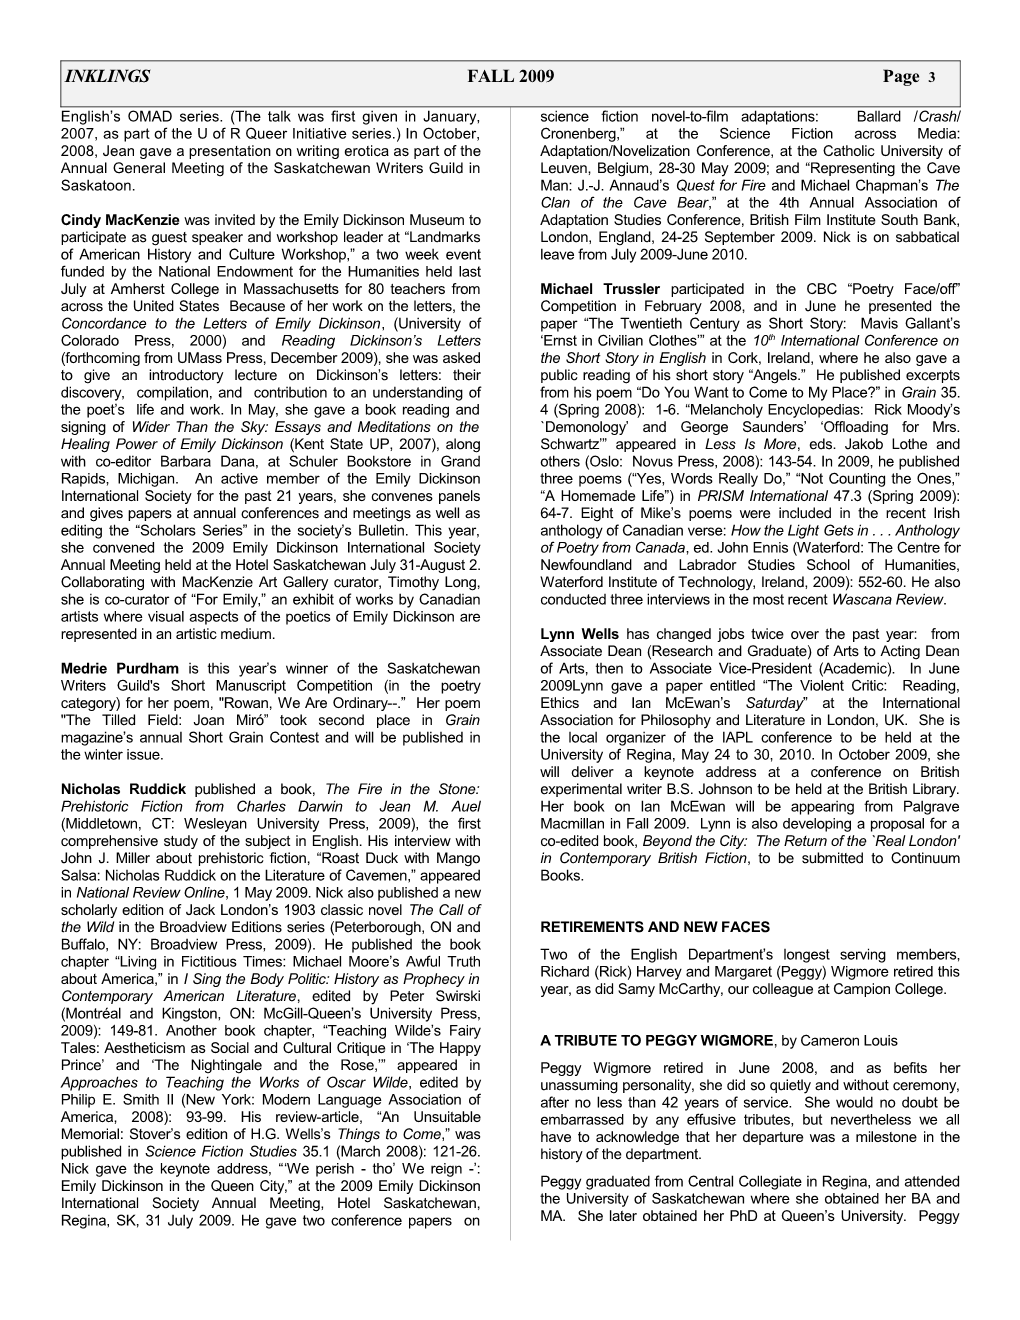 INKLINGS FALL 2009 Page 4